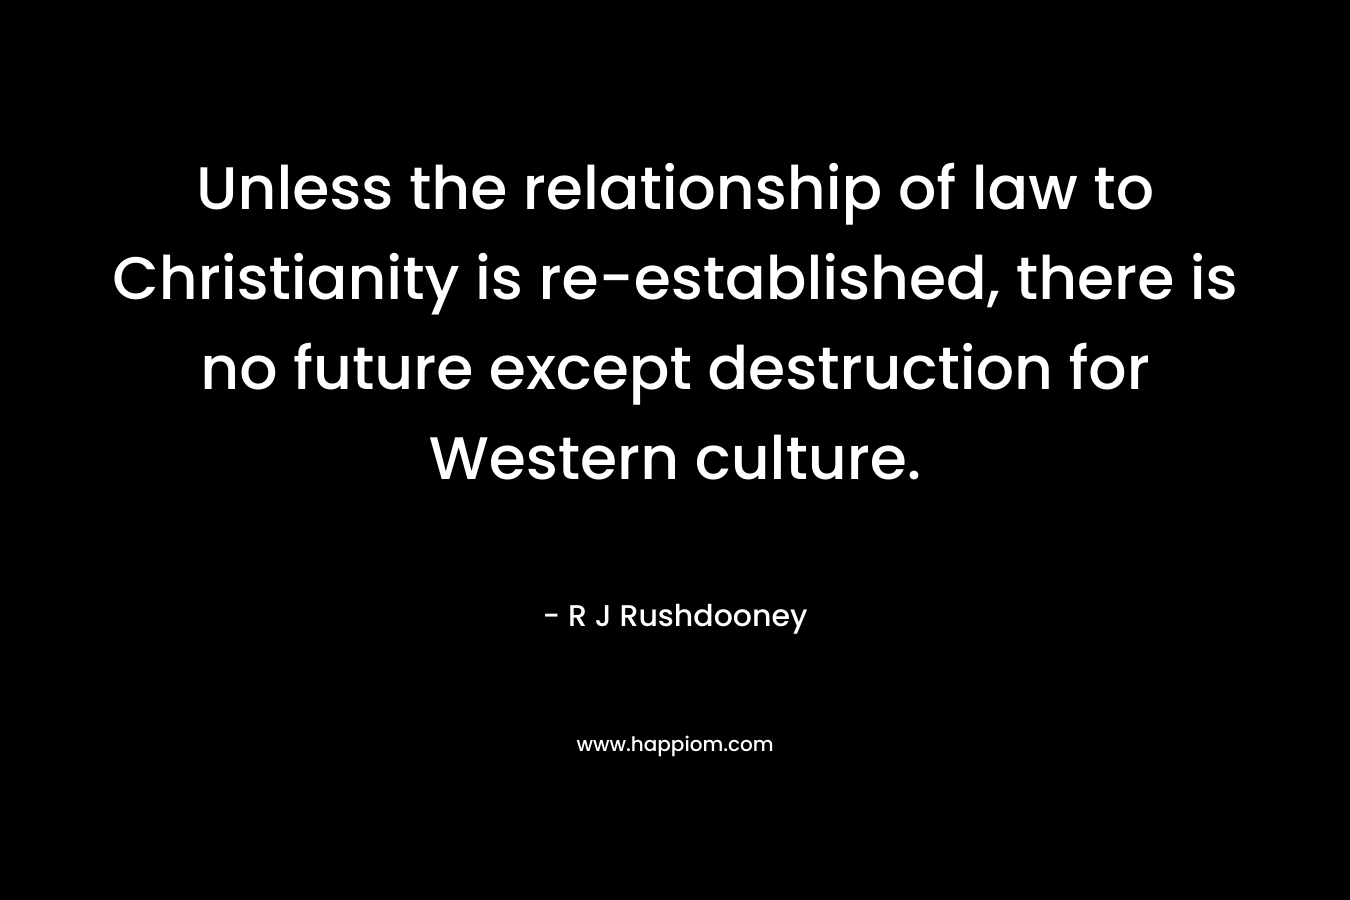 Unless the relationship of law to Christianity is re-established, there is no future except destruction for Western culture.